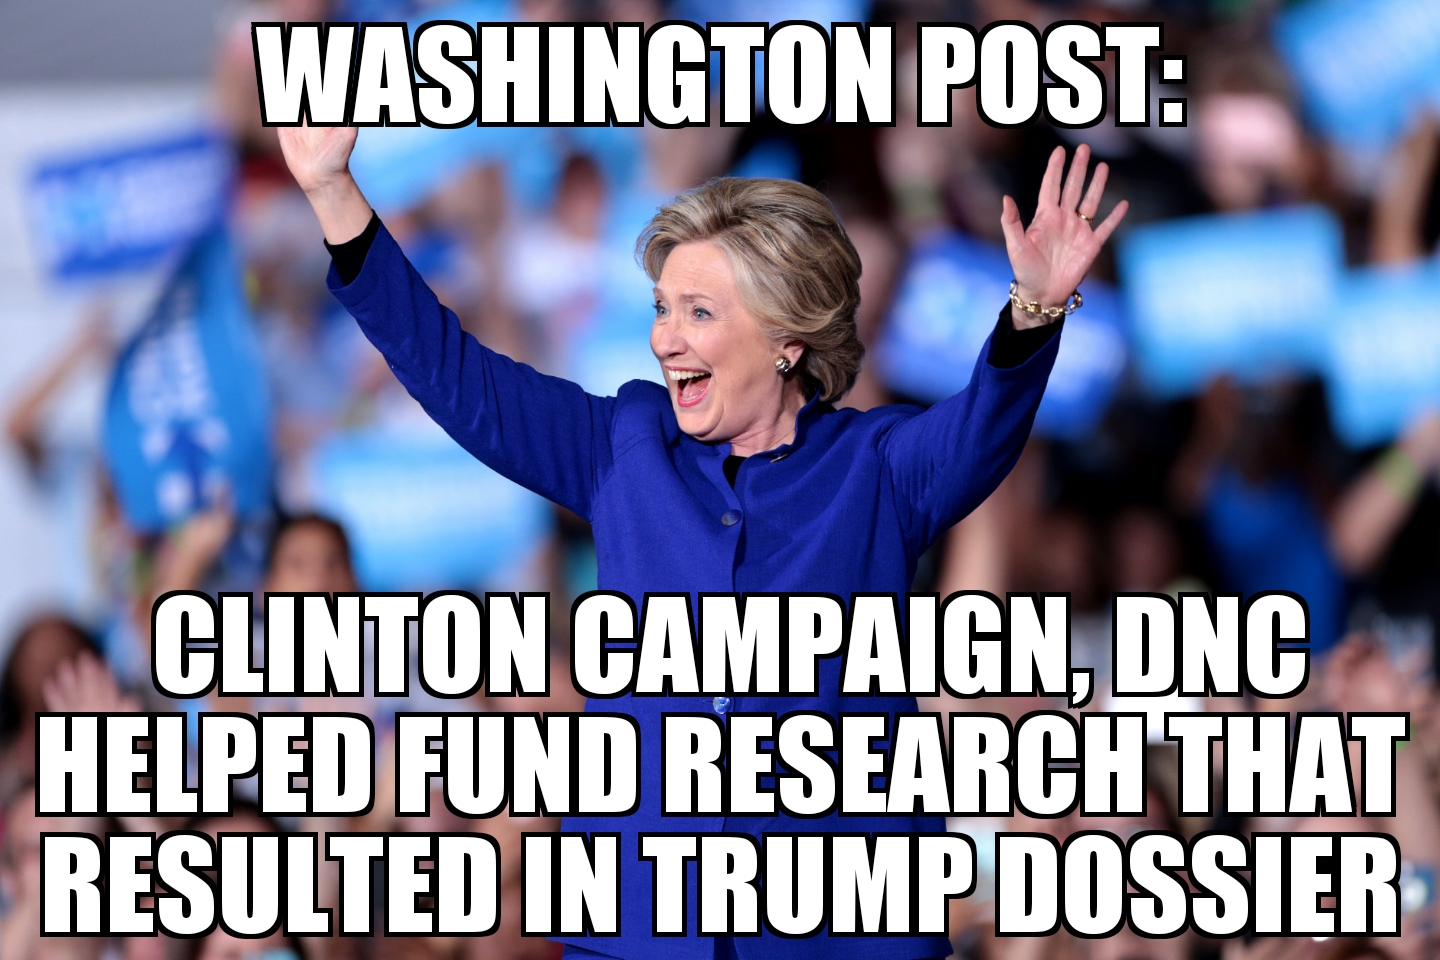 Clinton campaign, DNC helped fund Trump dossier